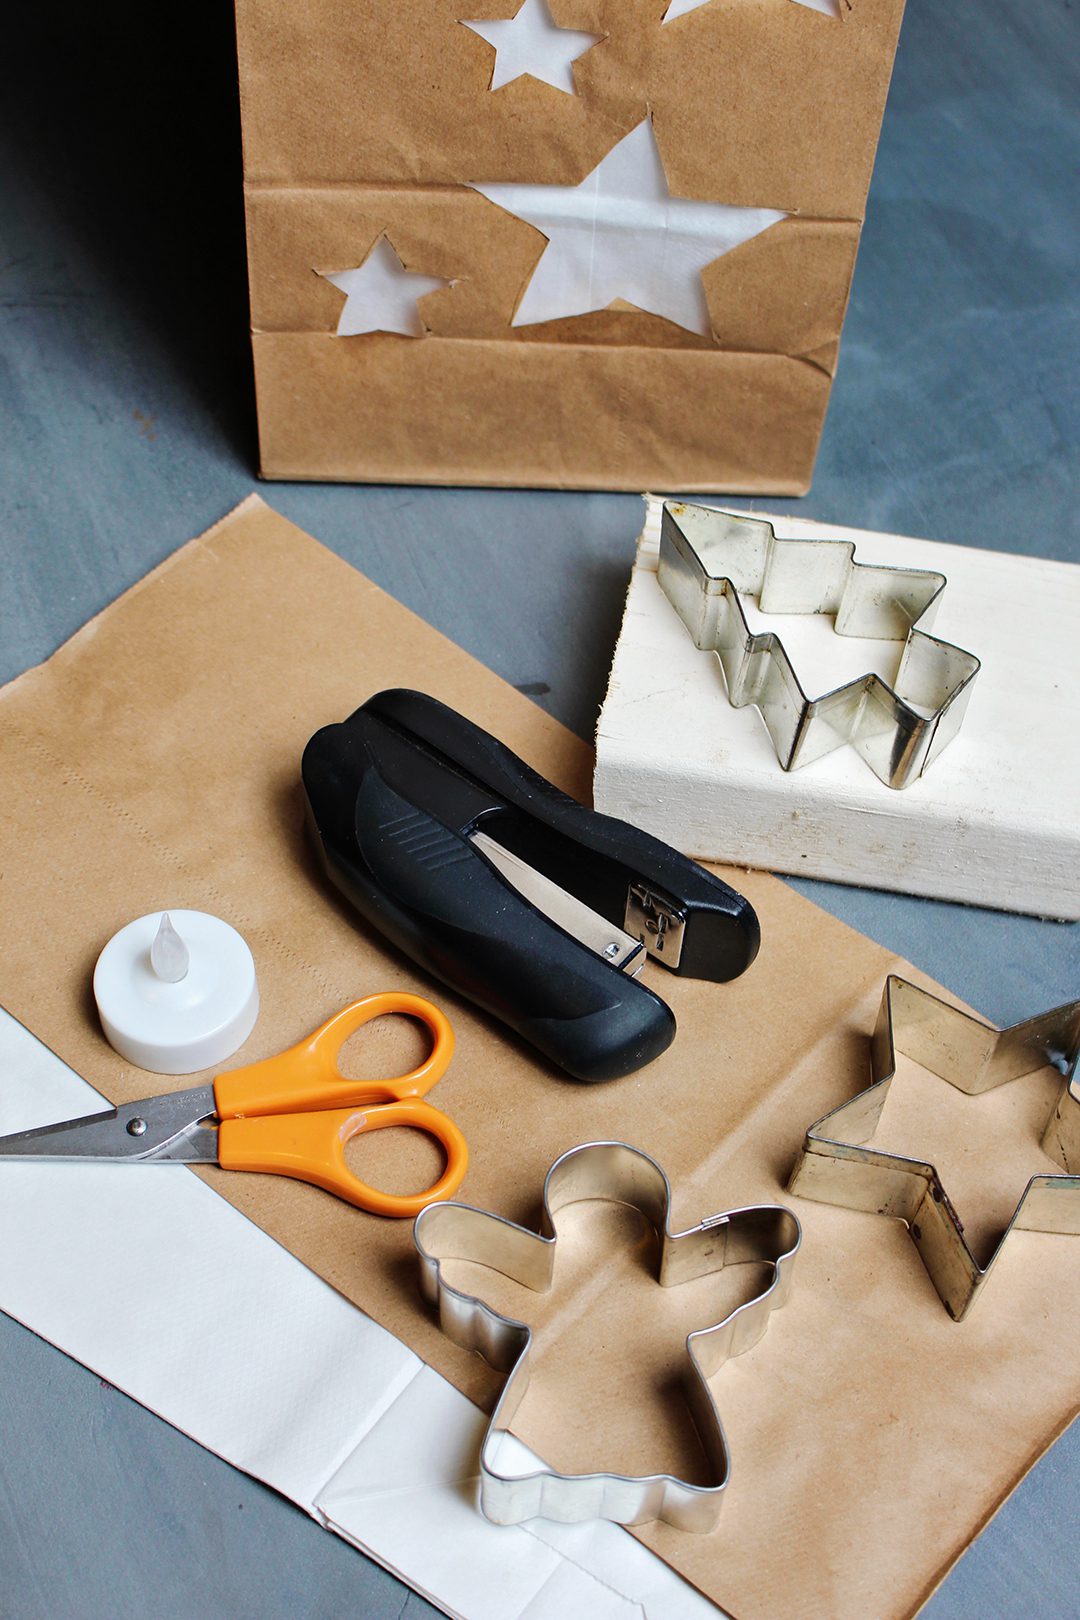 A pair of scissors, stapler, tea light, and cookie cutters sitting near a brown paper bag Christmas luminary.